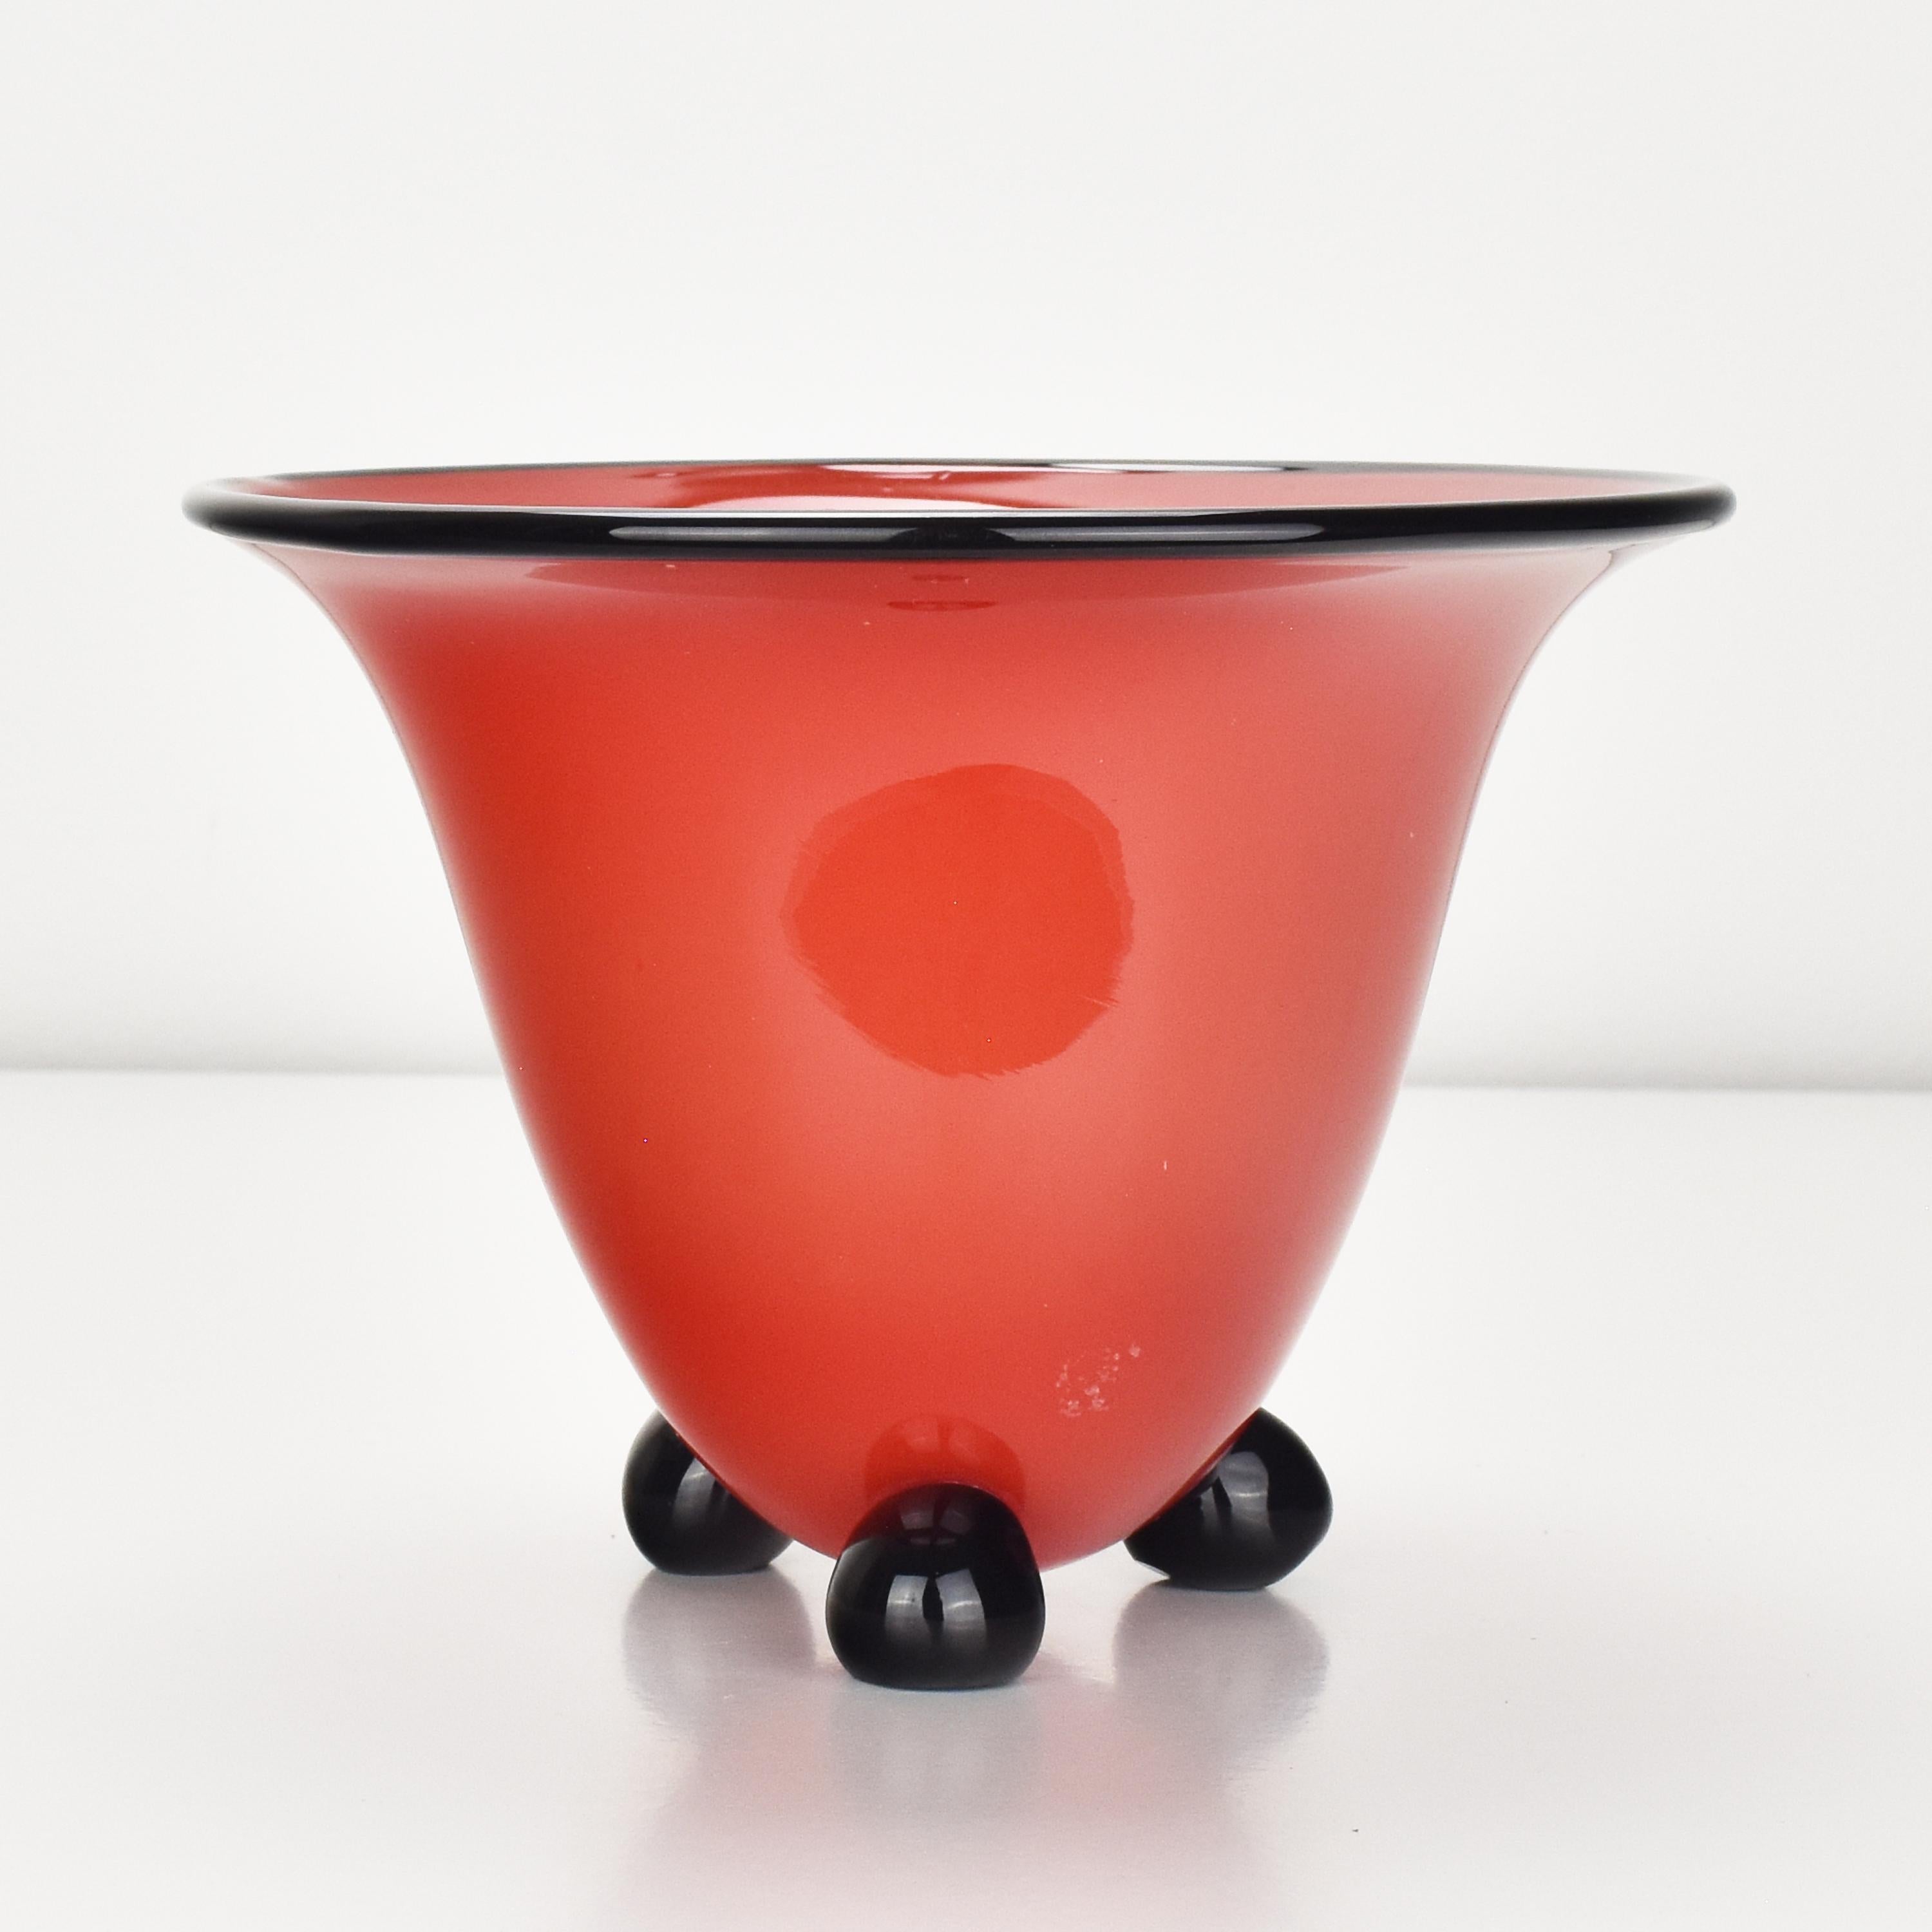 This antique Art Nouveau art glass vase by Michael Powolny for Loetz is an impressive and highly sought-after art piece from the early 20th century. This vase stands out for its exceptional design and superb craftsmanship. 

The coral red glass of